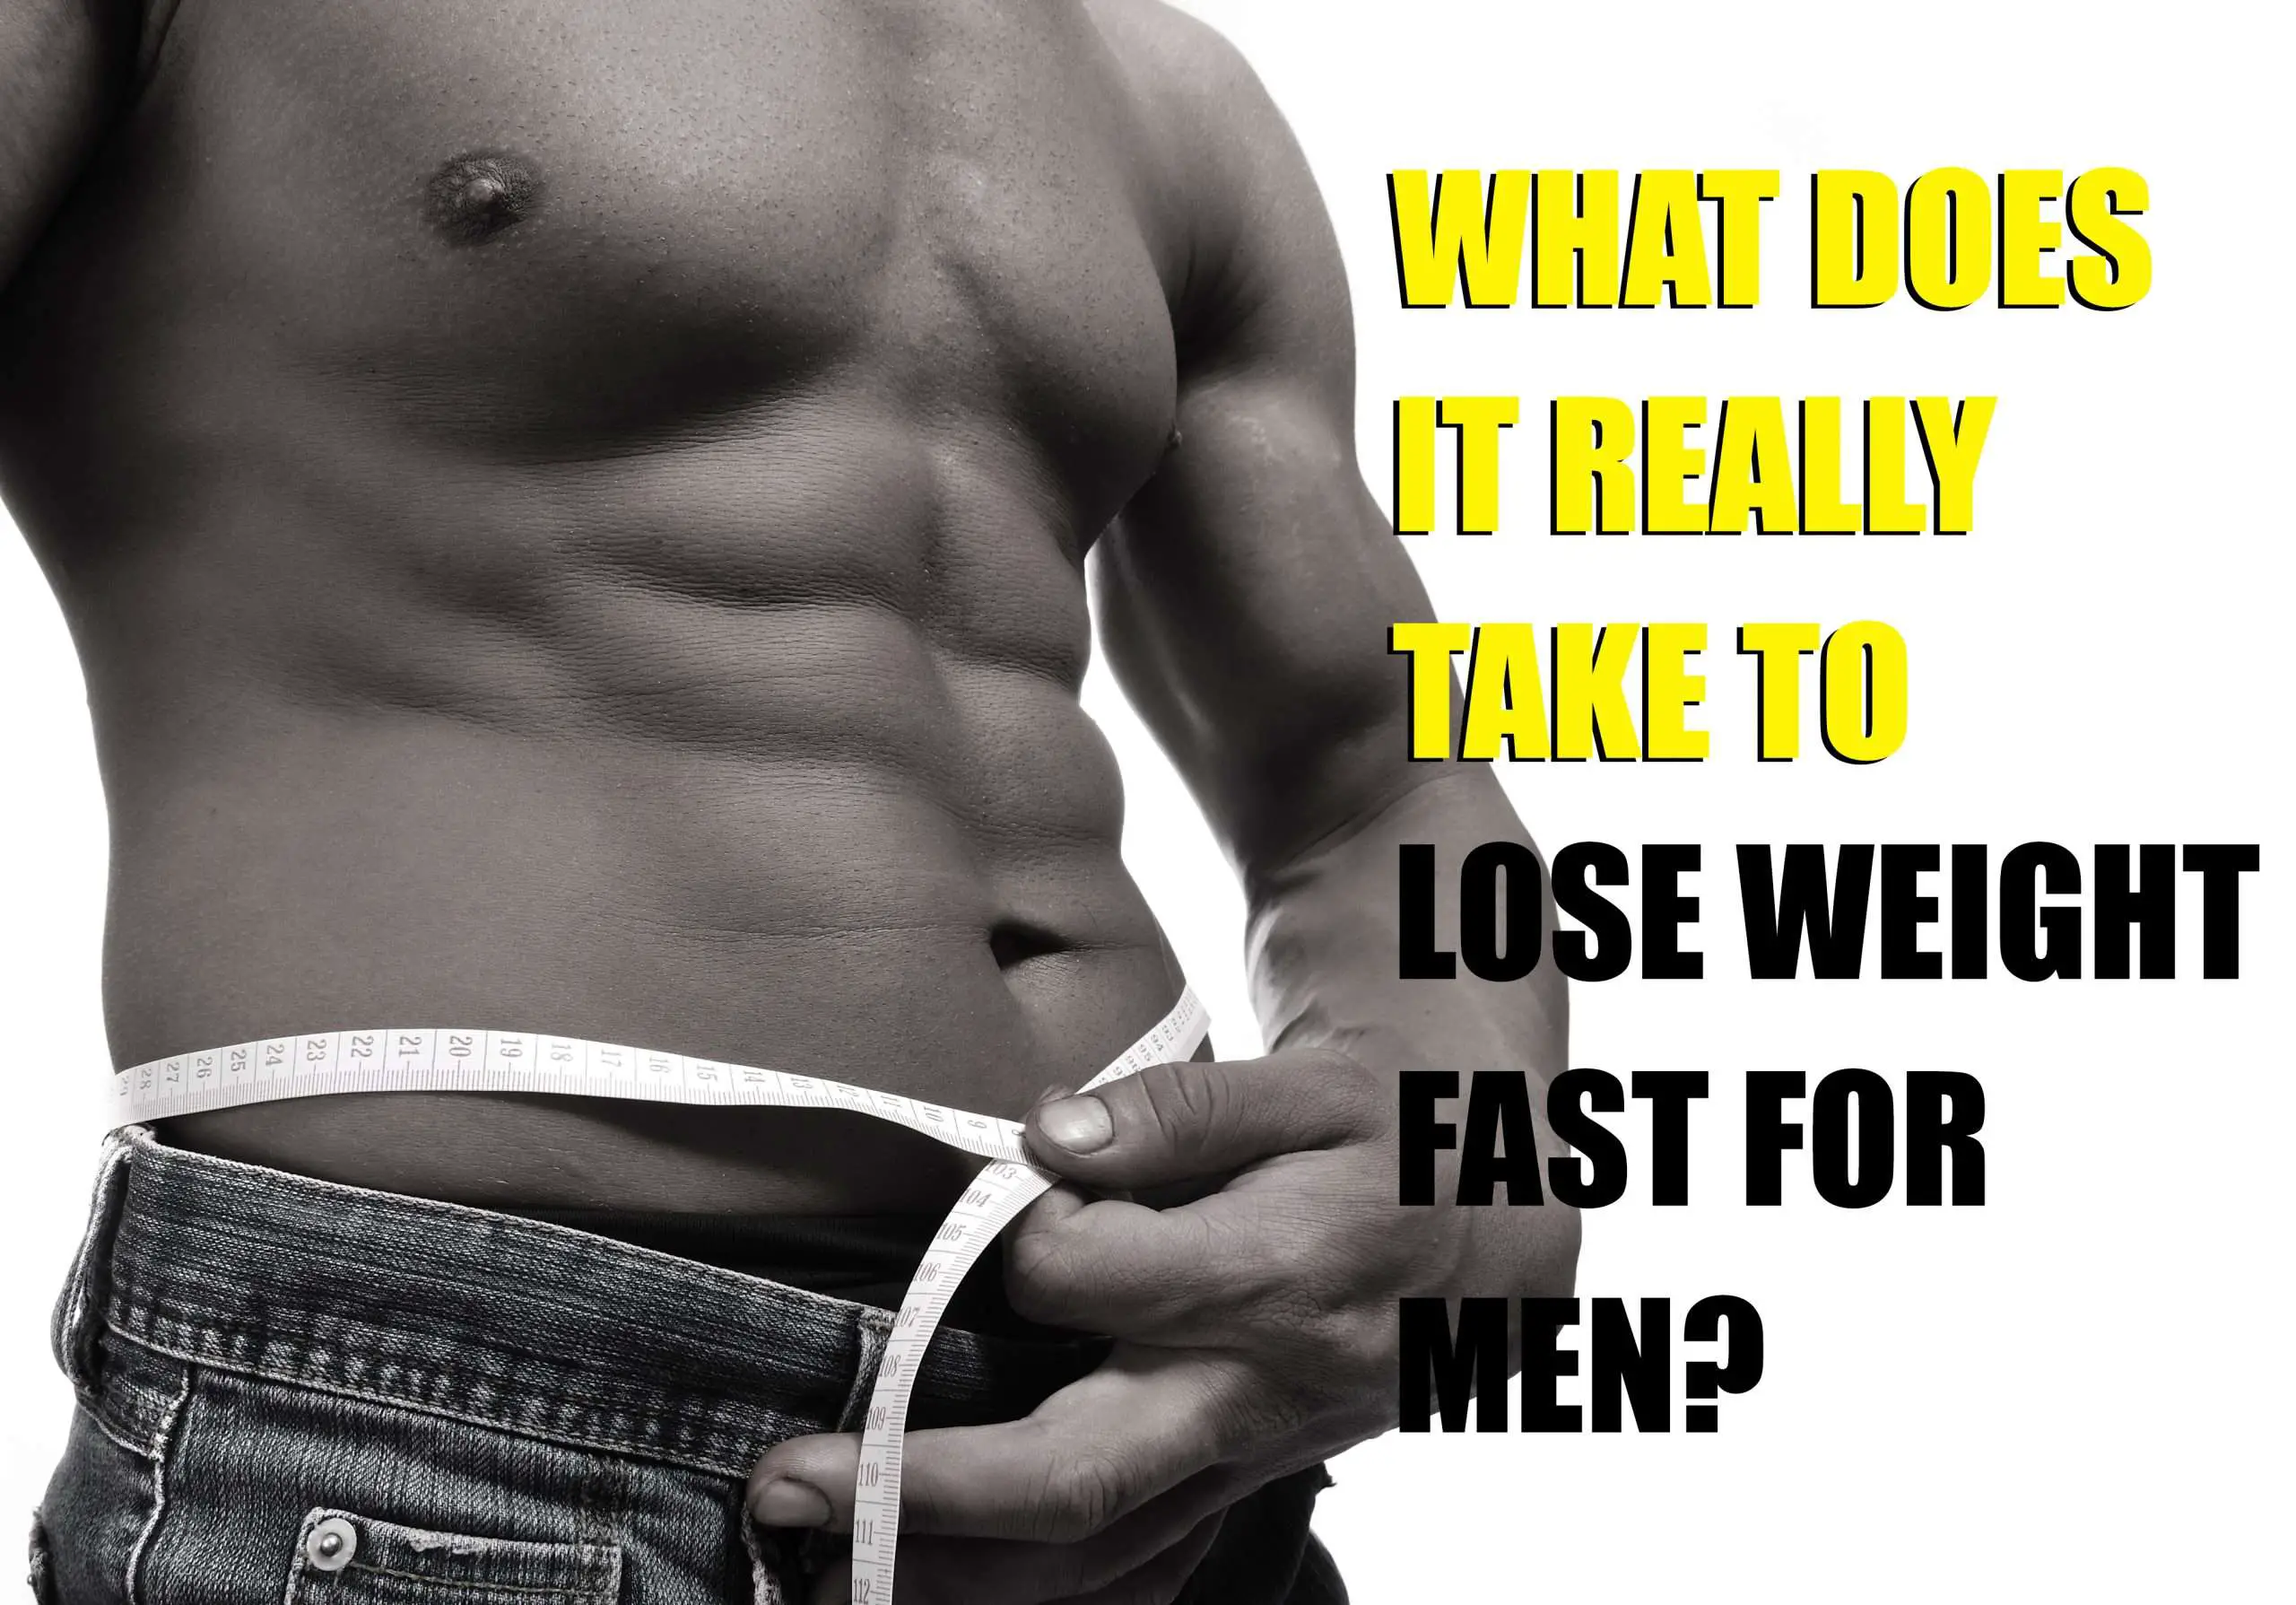 What Does It Really Take to Lose Weight Fast For Men?